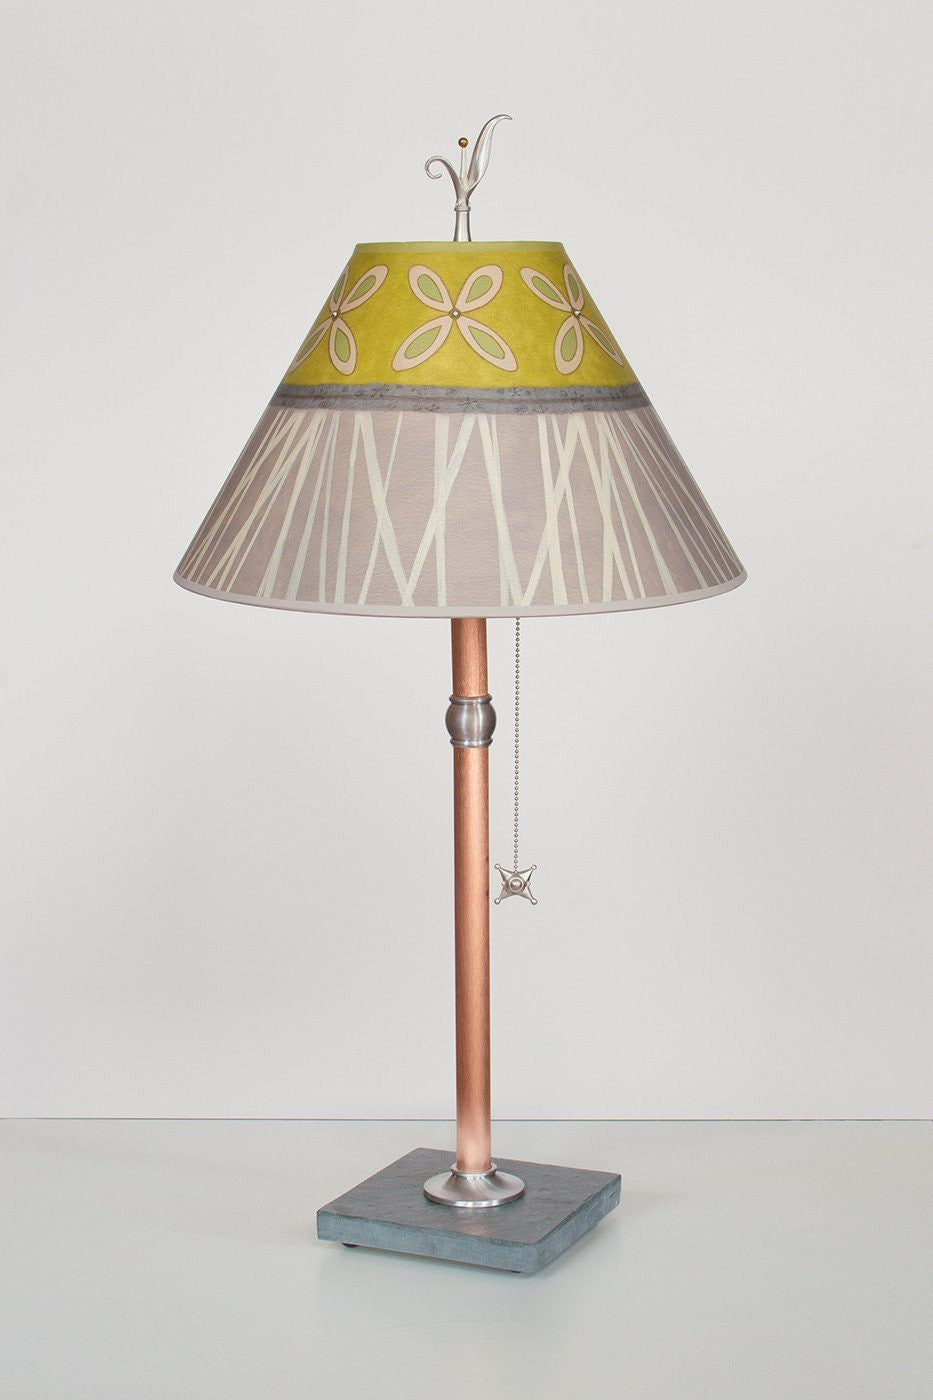 Janna Ugone &amp; Co Table Lamps Copper Table Lamp with Medium Conical Shade in Kiwi